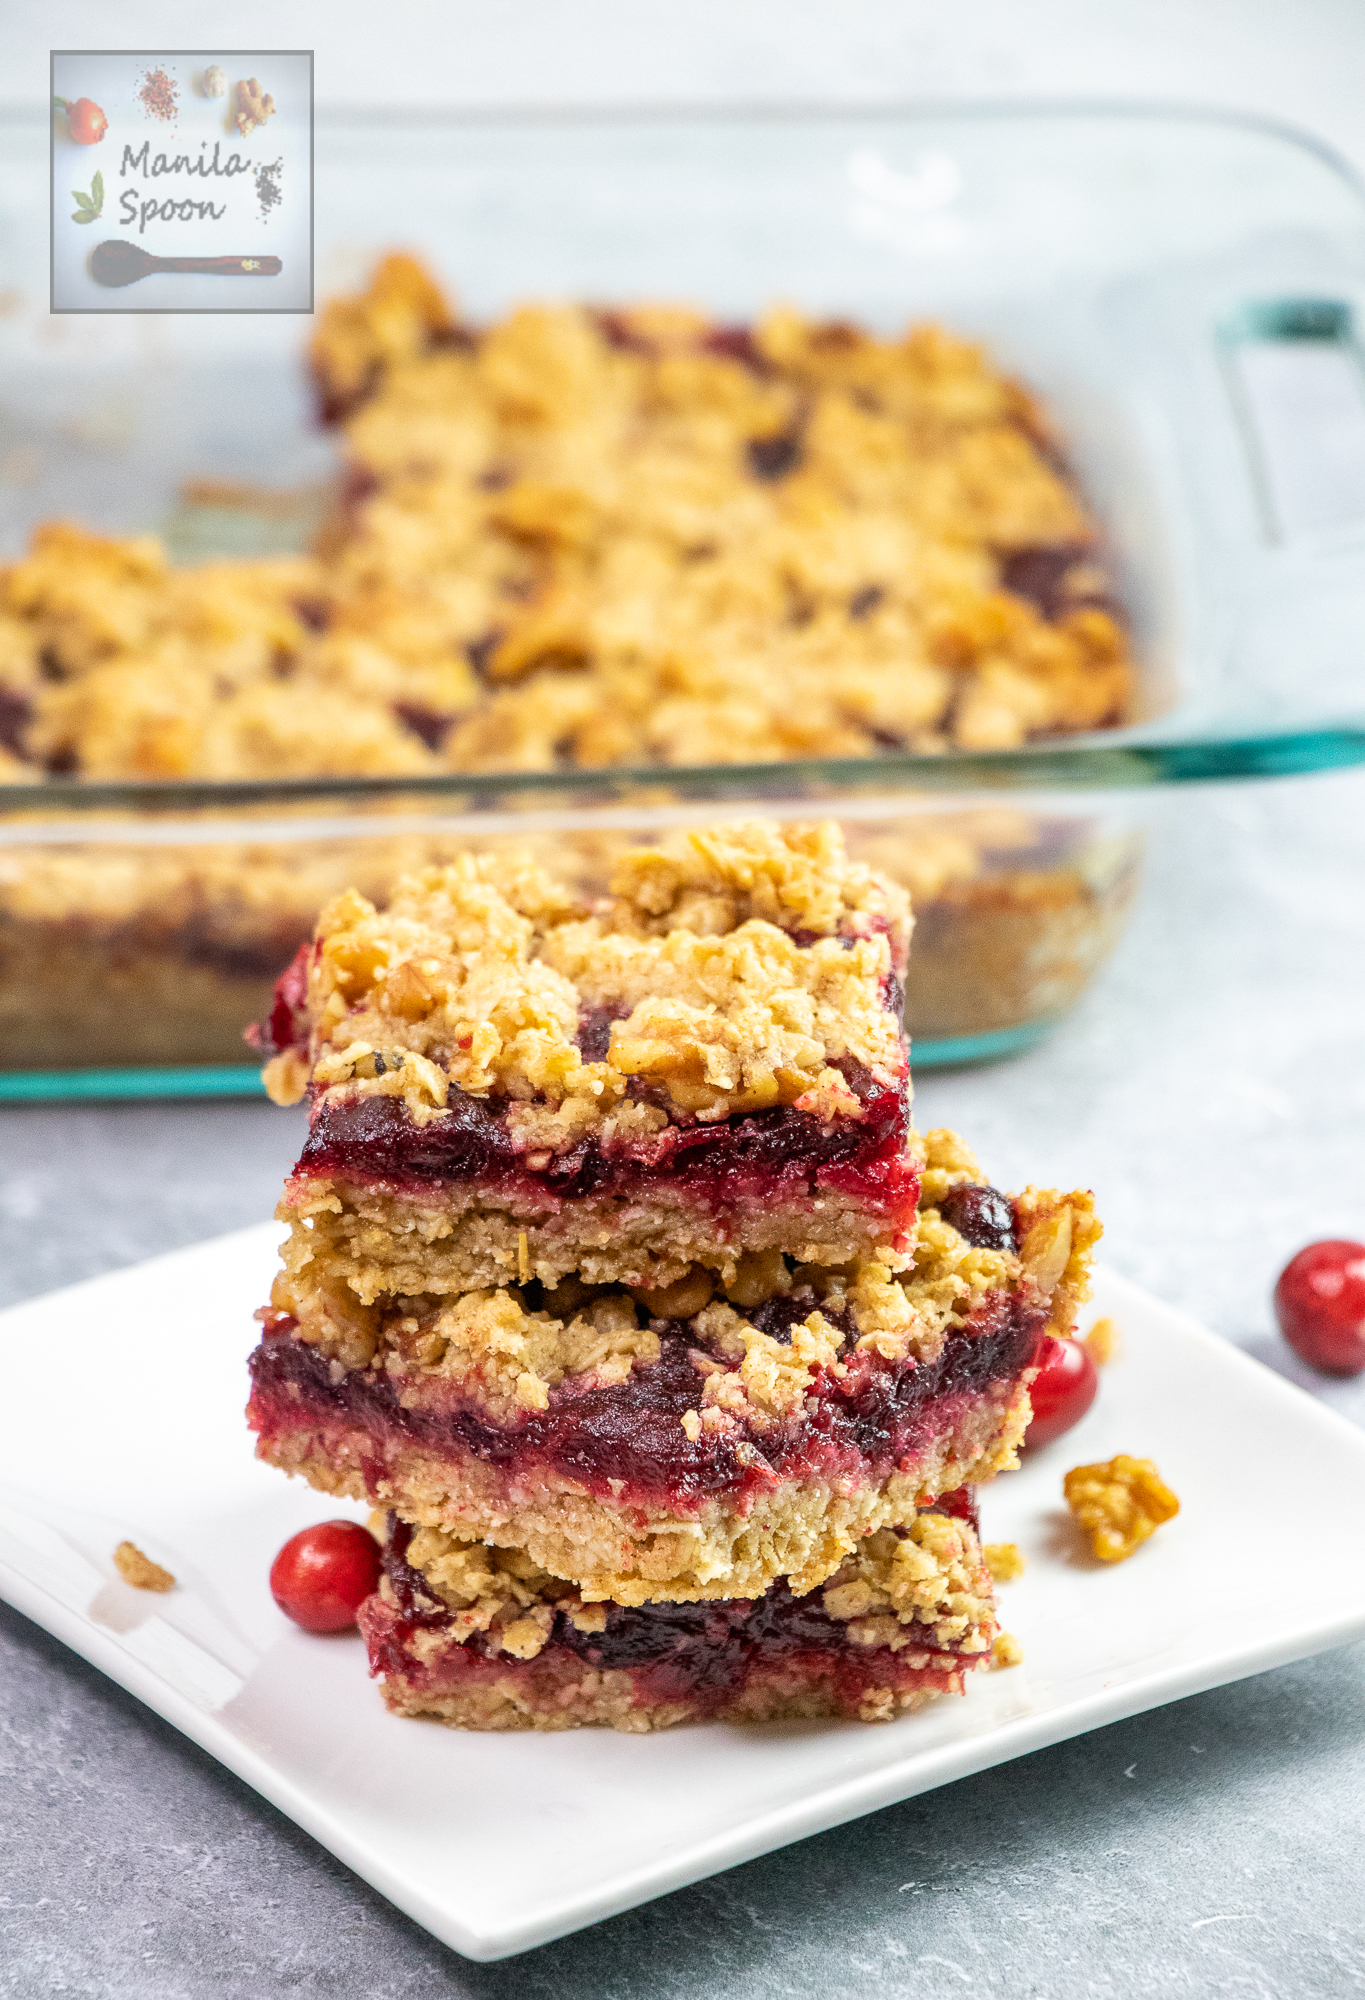 With a perfect balance of sweet and tart these scrumptious cranberry oat bars are the perfect holiday treat! The addition of chopped walnuts give them a nutty crunch that brings these yummy bars over the top. These bars can be made completely gluten-free and tastes as deliciously good!